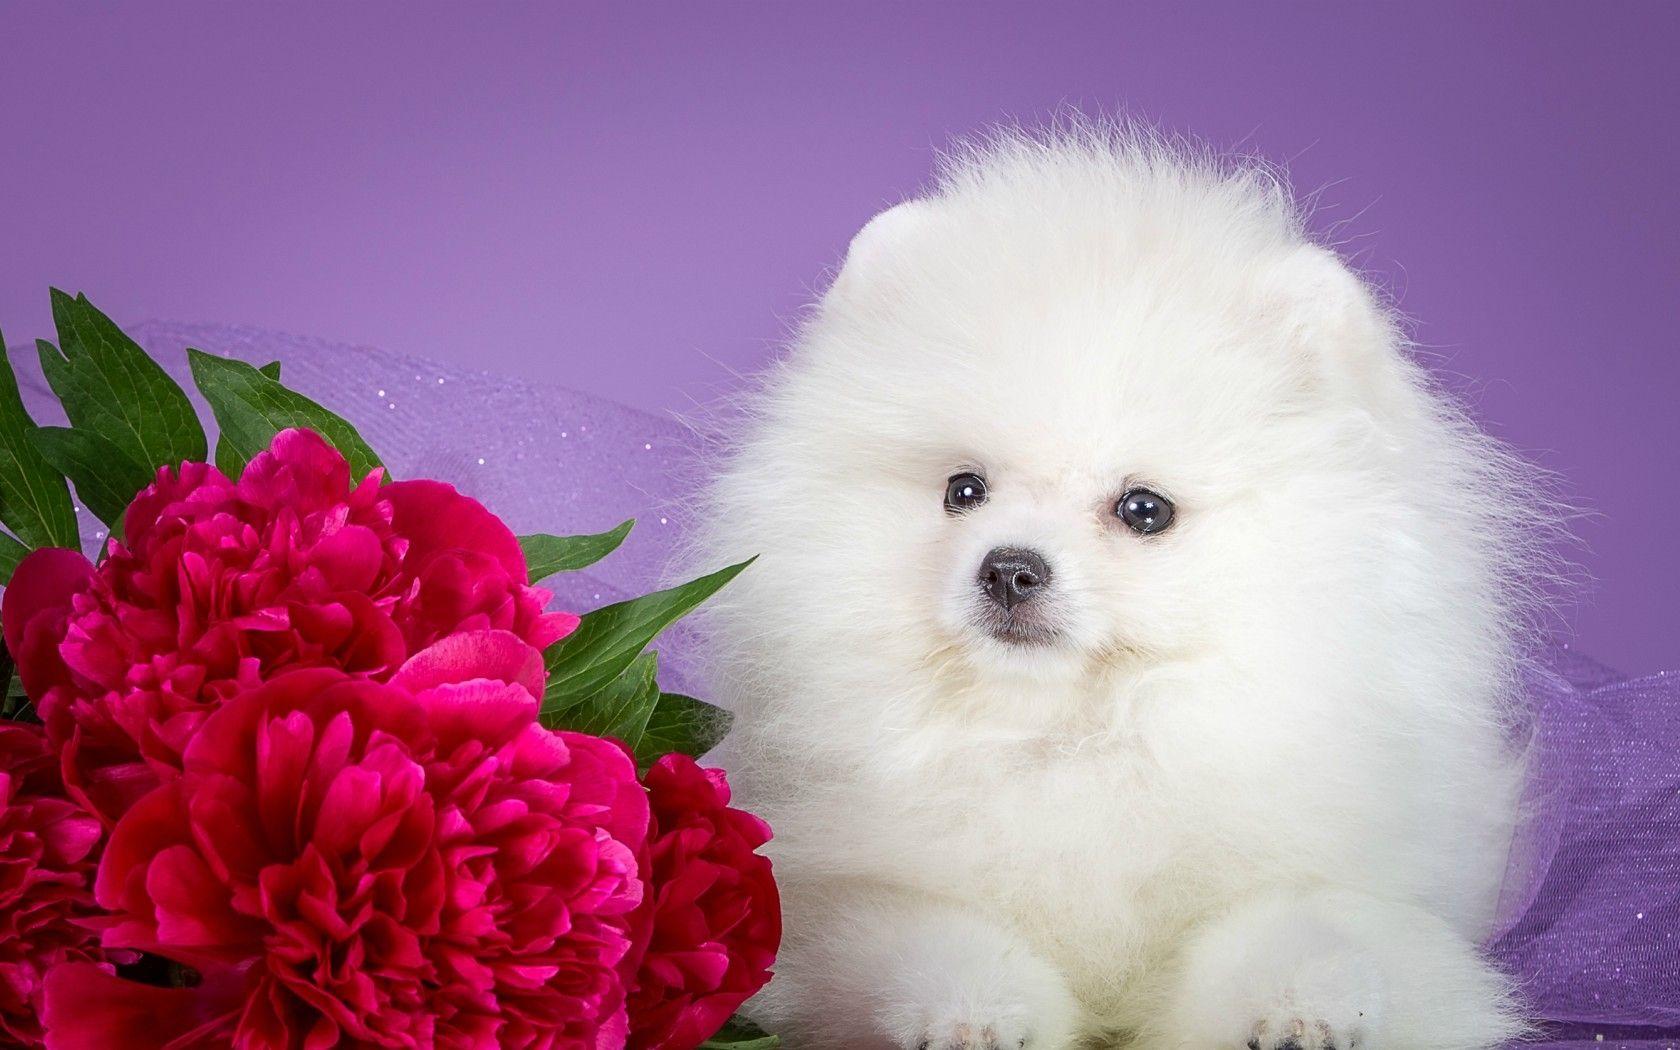 Dogs: Puppy Flower Dog Peony Sweet Cute White Fluffy Red Animal